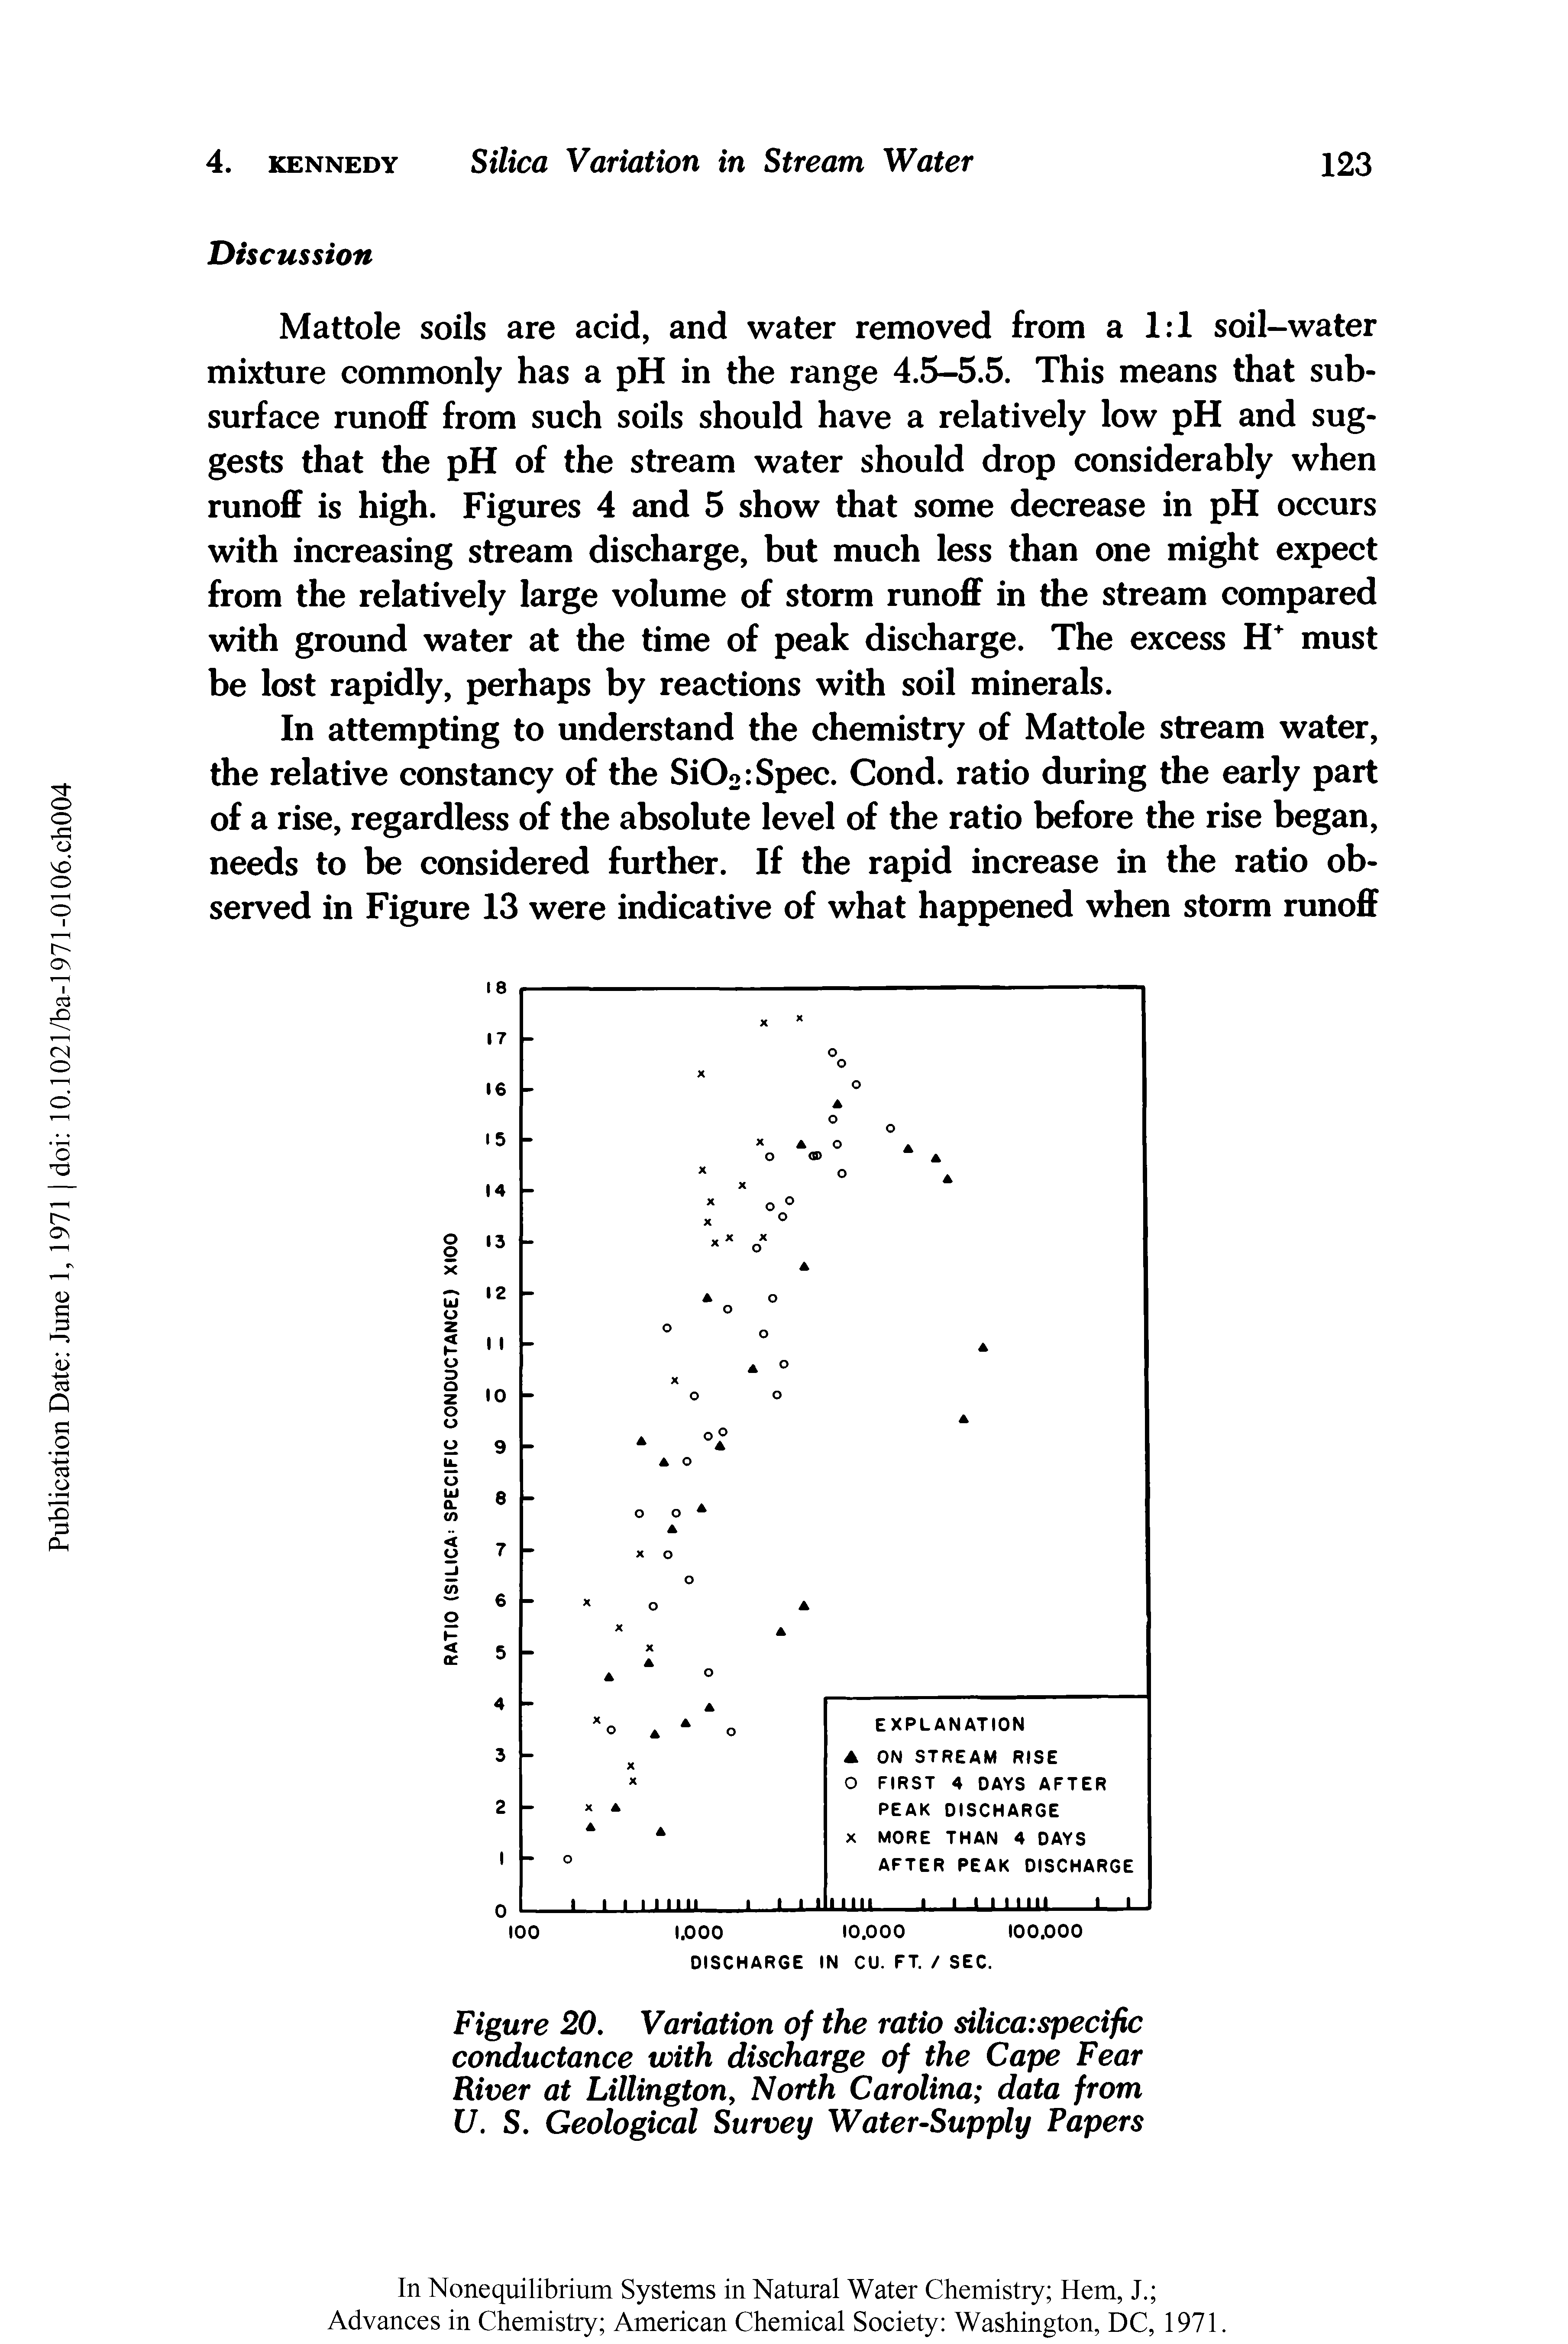 Figure 20. Variation of the ratio silica specific conductance with discharge of the Cape Fear River at Lillington, North Carolina data from U. S. Geological Survey Water-Supply Papers...